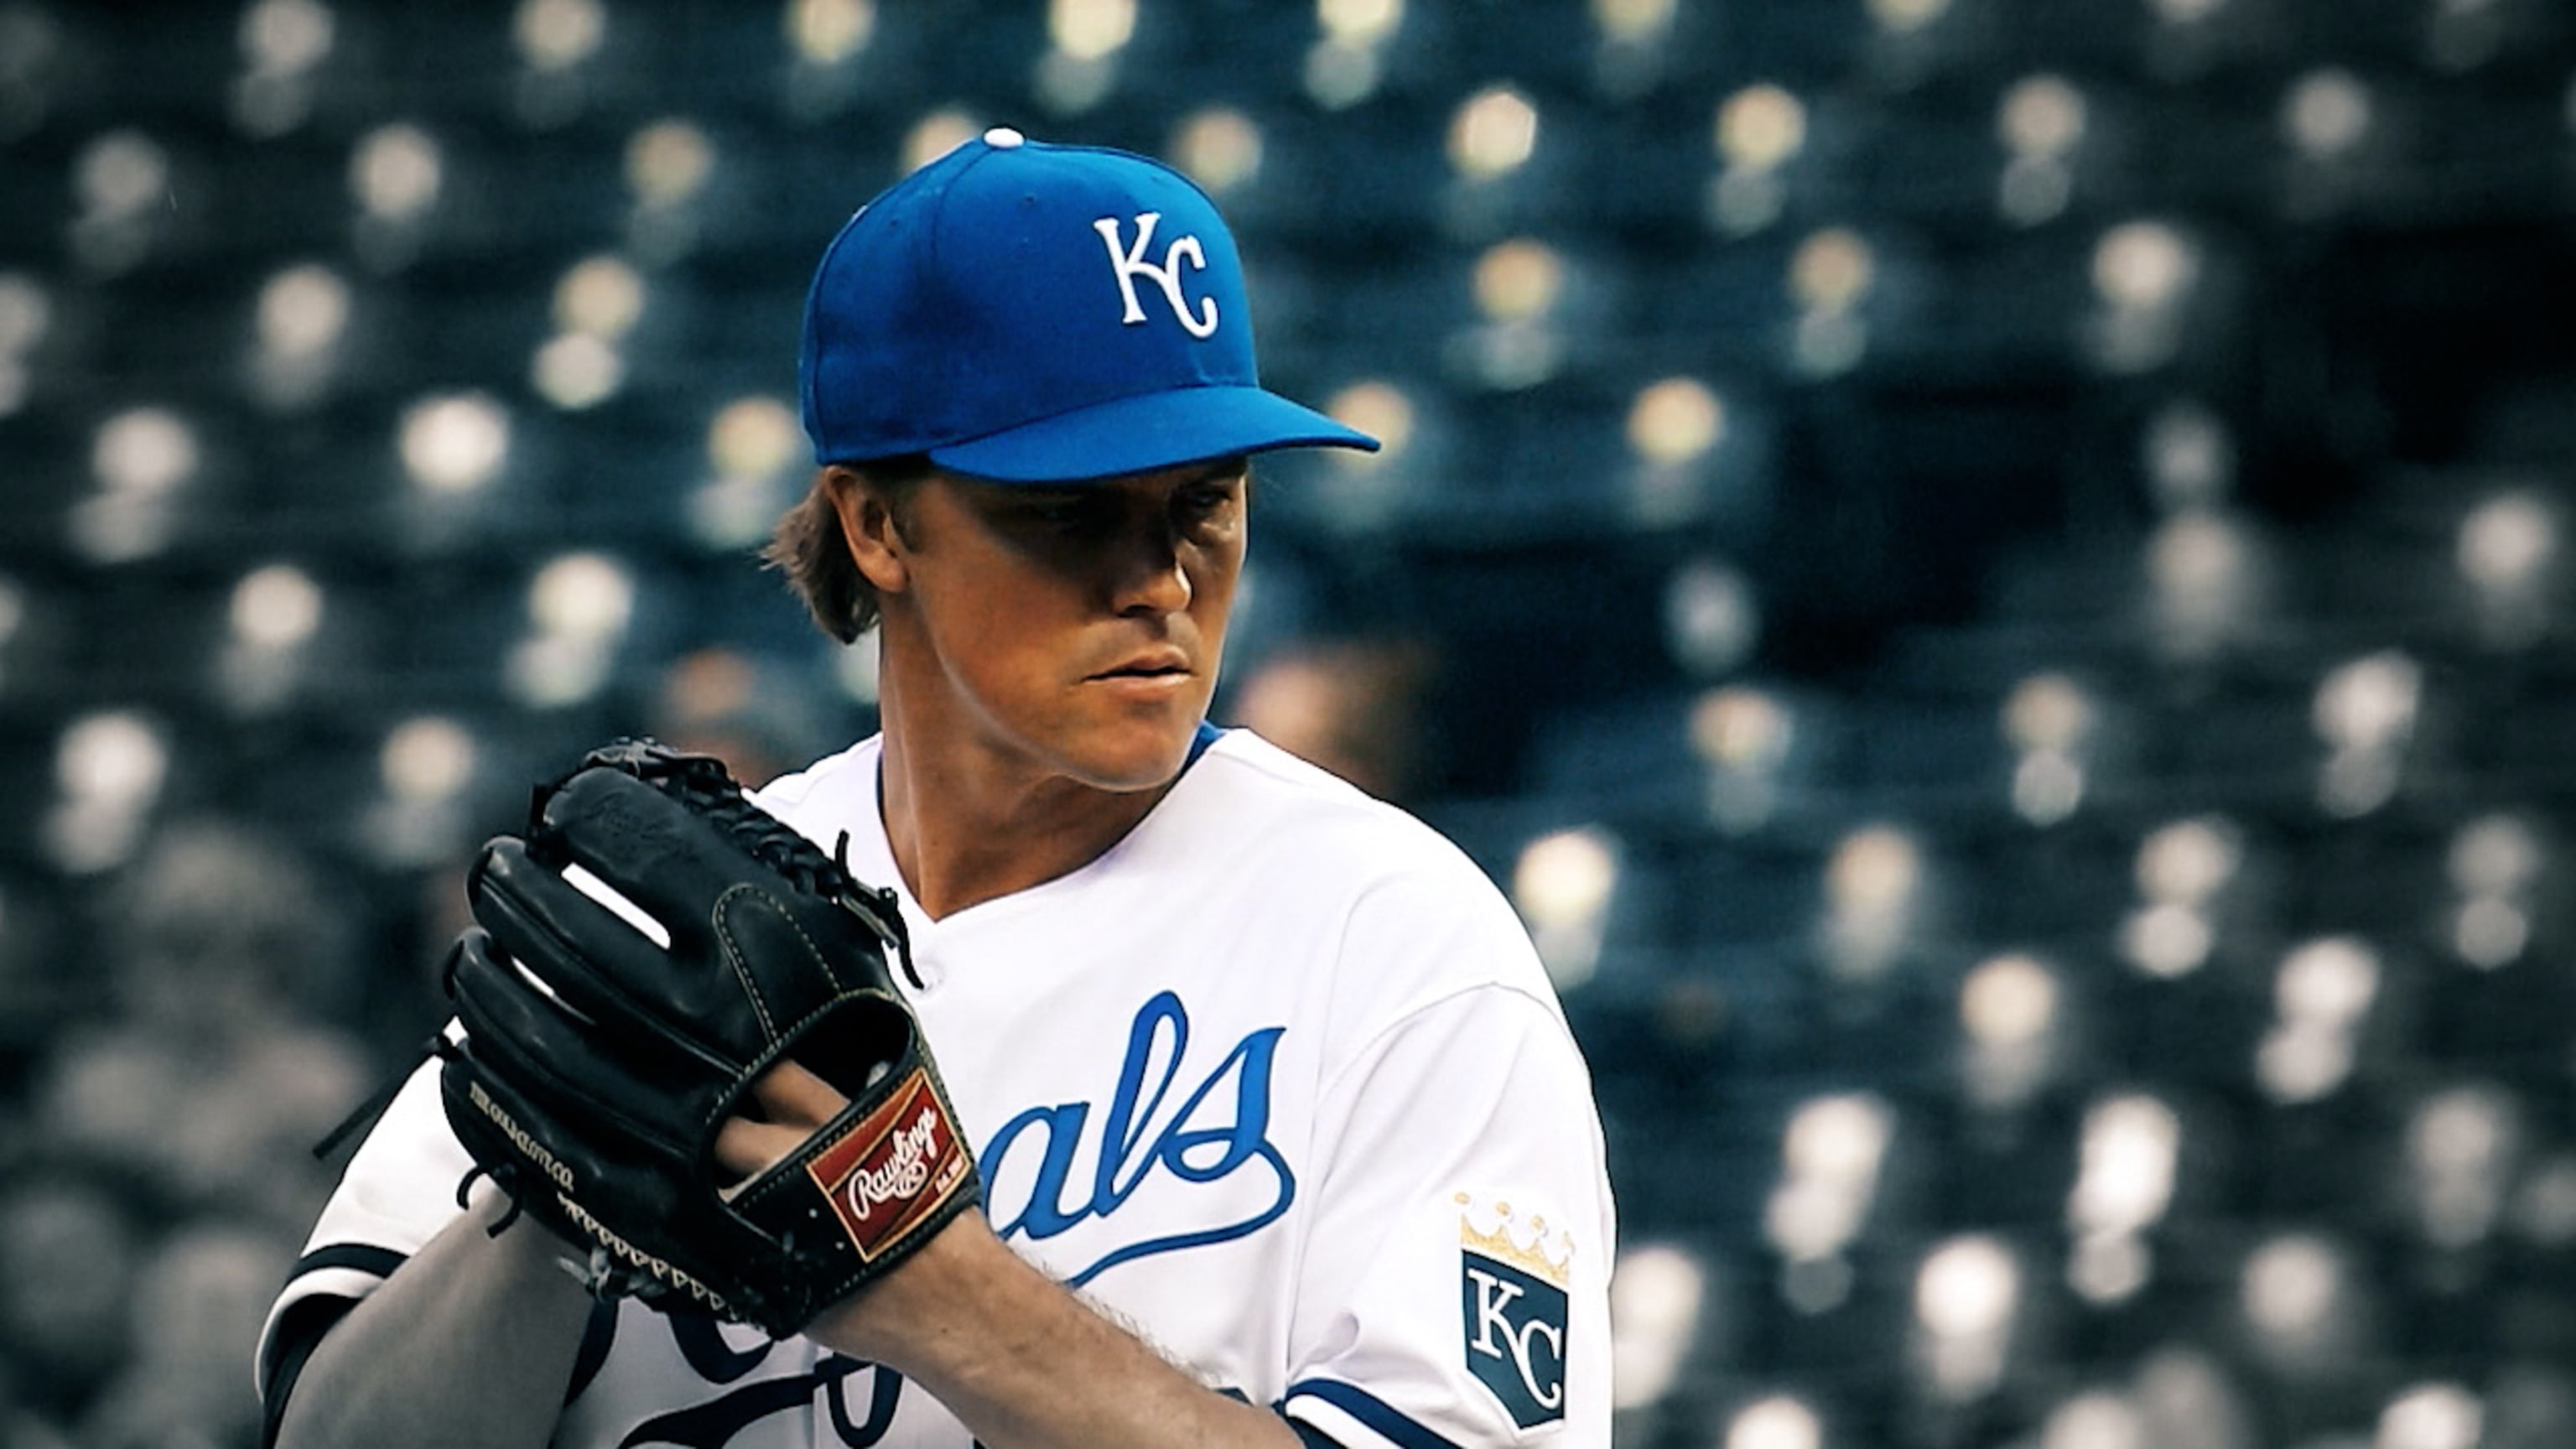 Kansas City Royals' Zack Greinke (23) pitches during the Rays 4